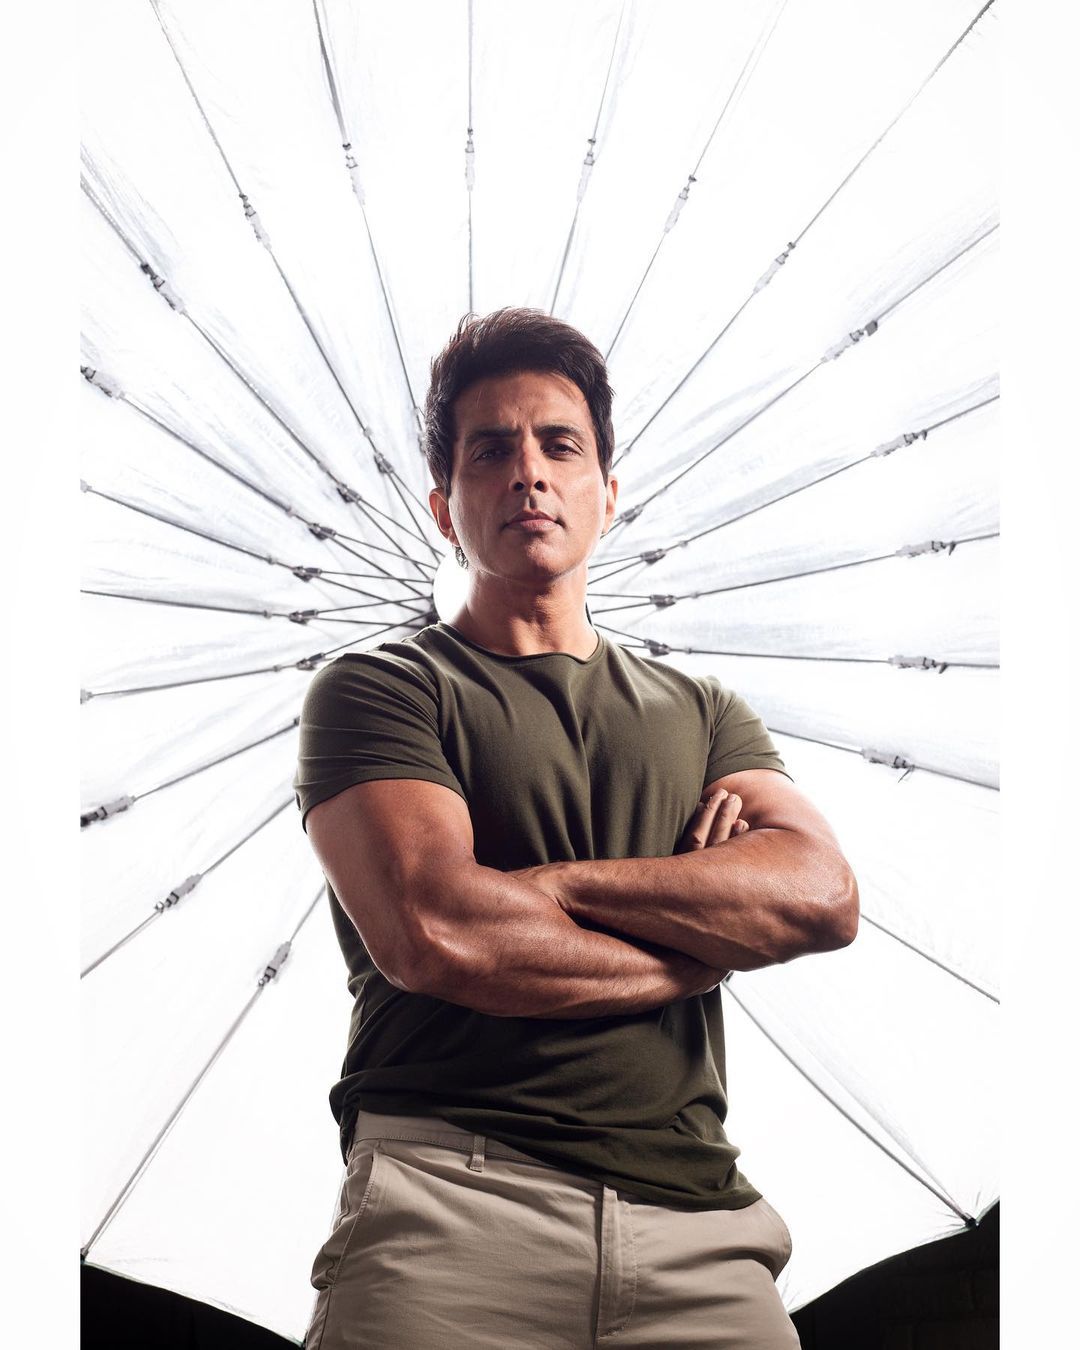 Sonu Sood Reacts To Being Called A 'Habitual Offender' By BMC In Case Of Alleged Illegal Construction On Residential Property 